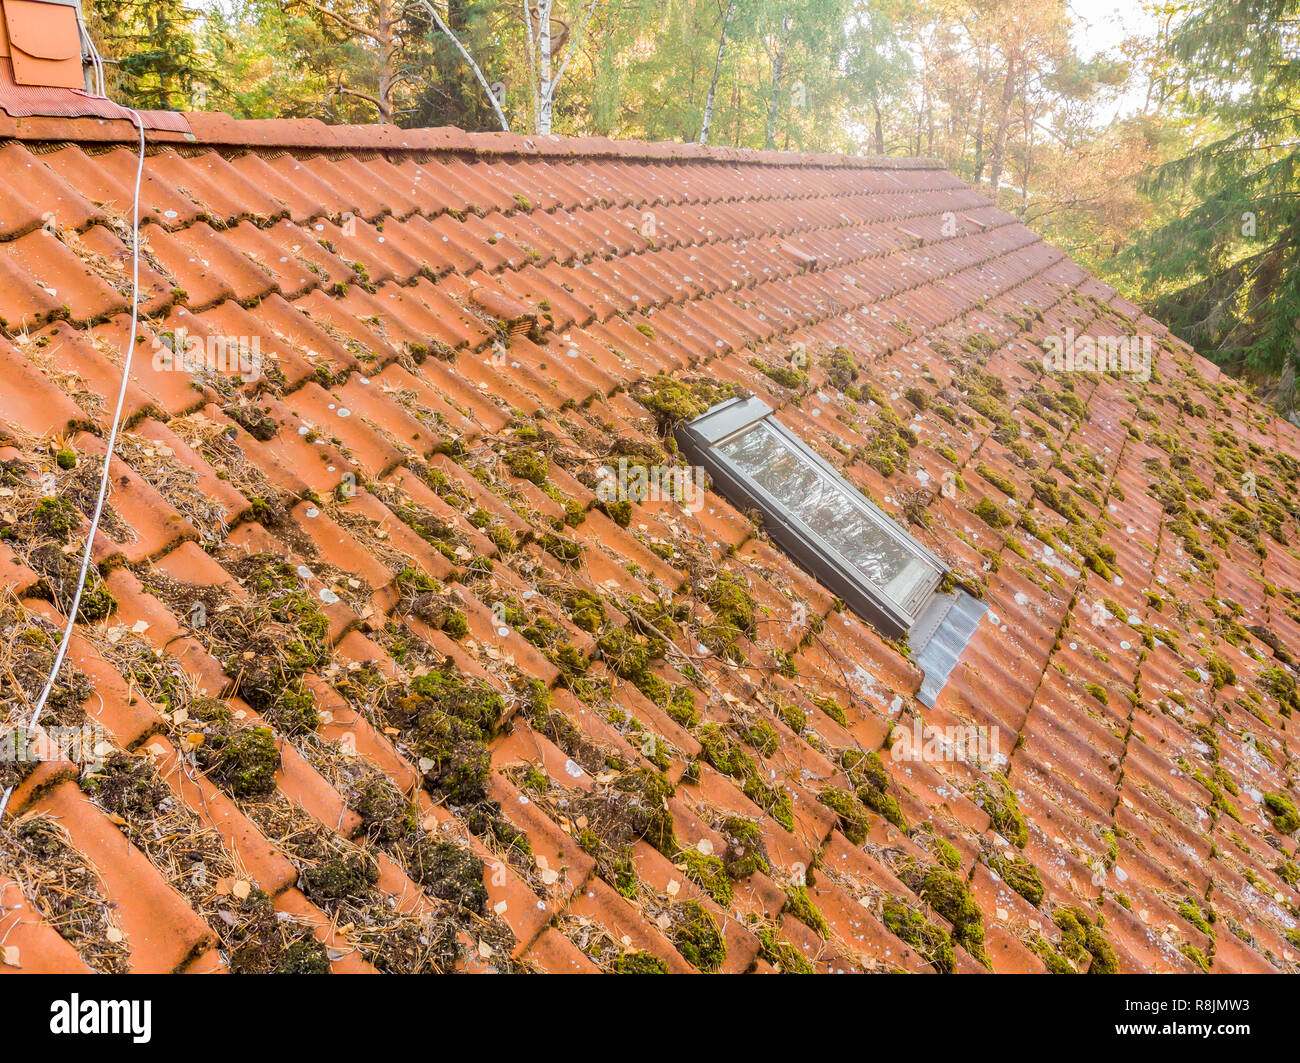 Inspection of the red tiled roof of a single-family house, inspection of the condition of the tiles on one roof side. Stock Photo